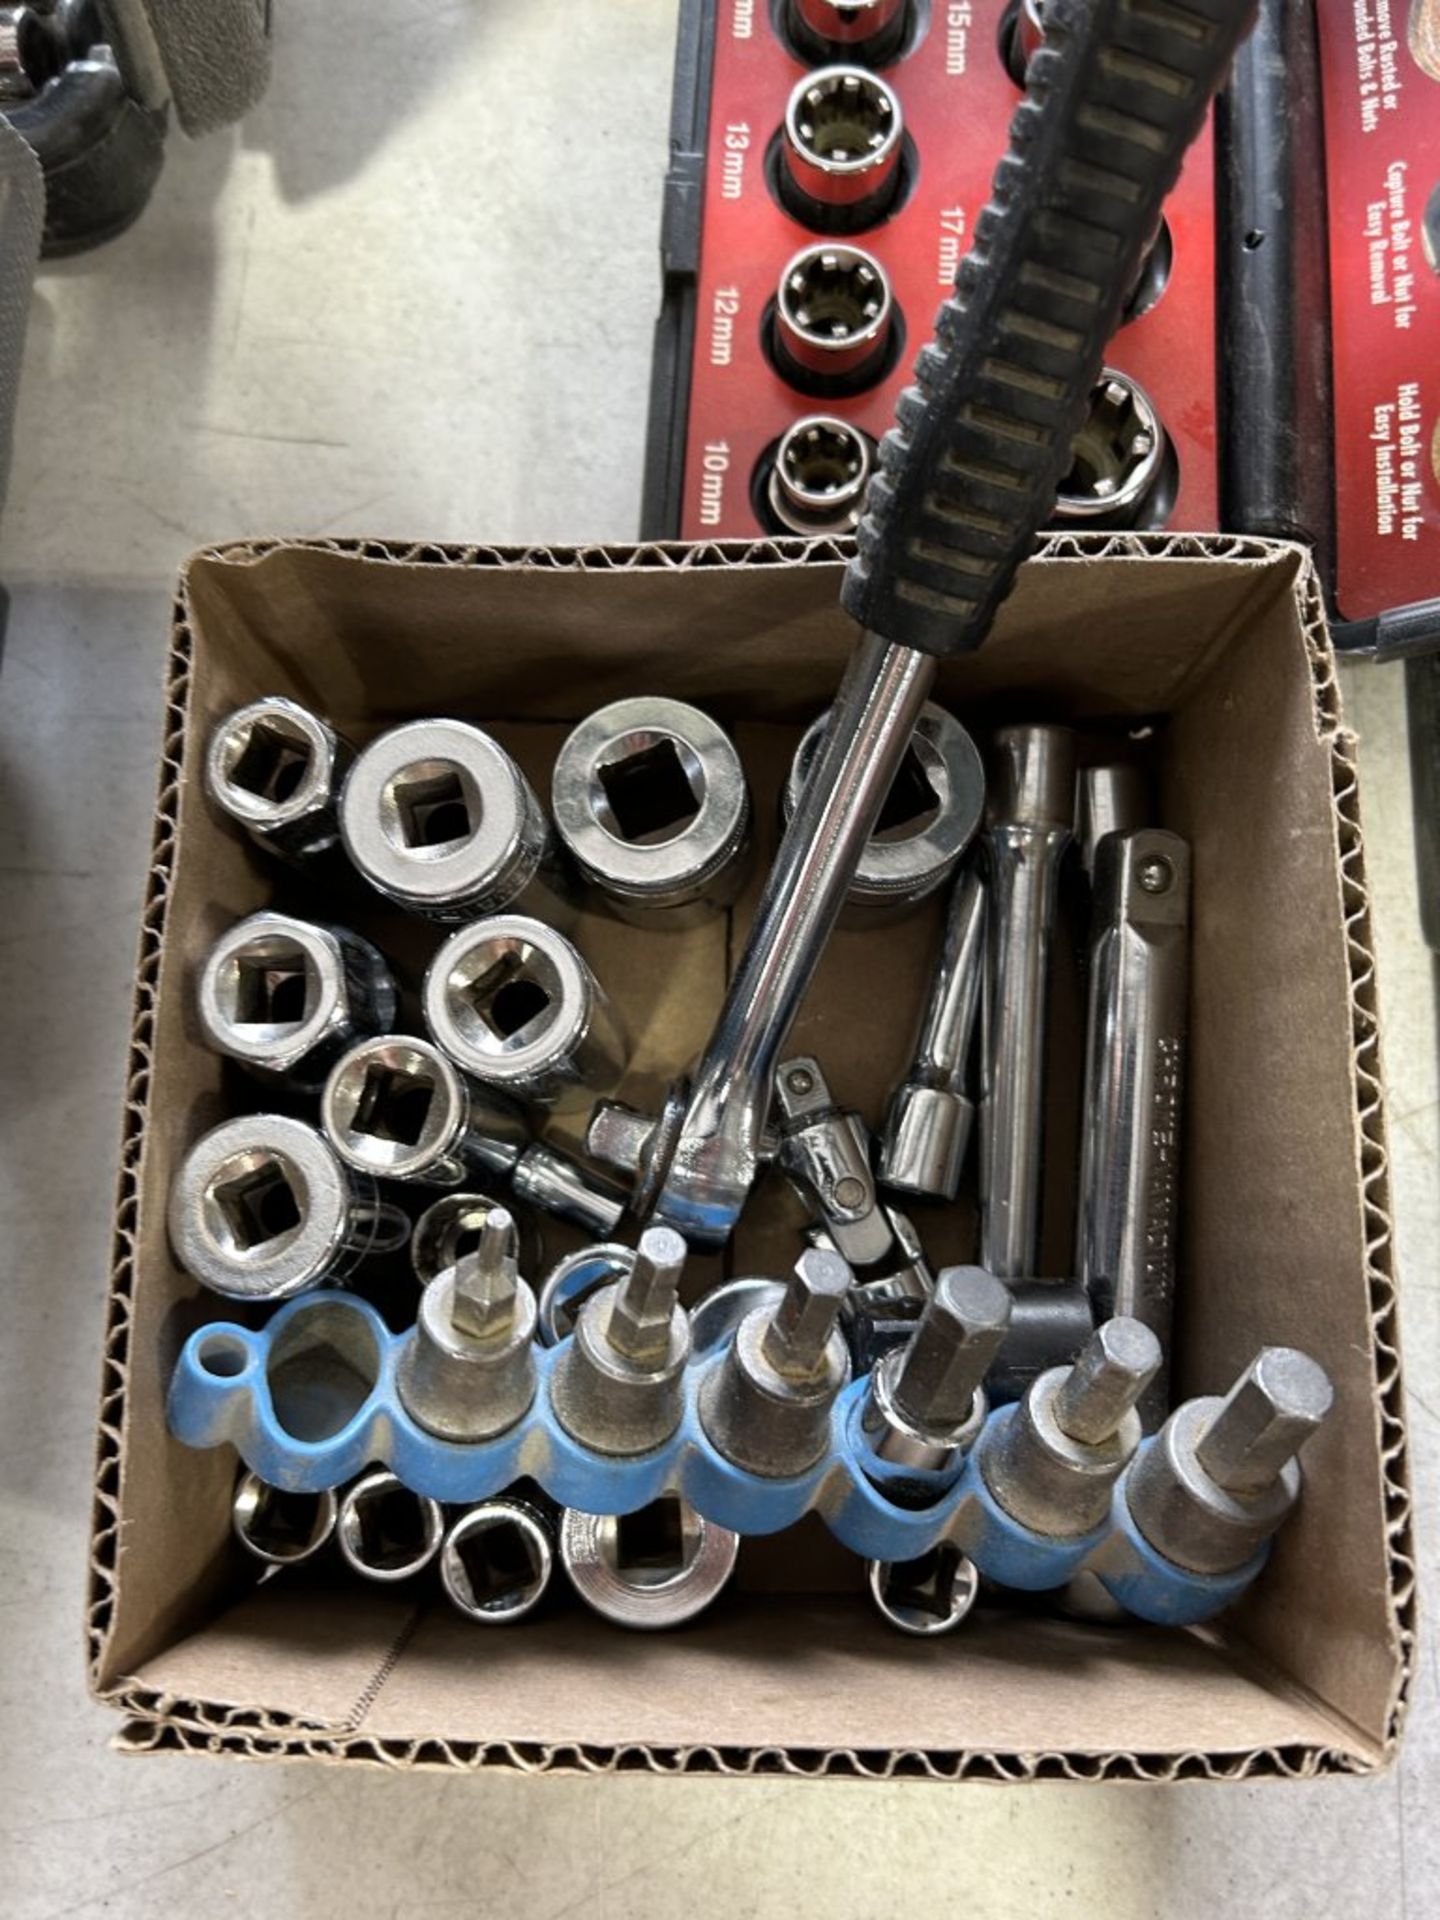 ASSORTED SOCKET SETS, WRENCHES, SUPER SOCKETS, ETC. - Image 6 of 7